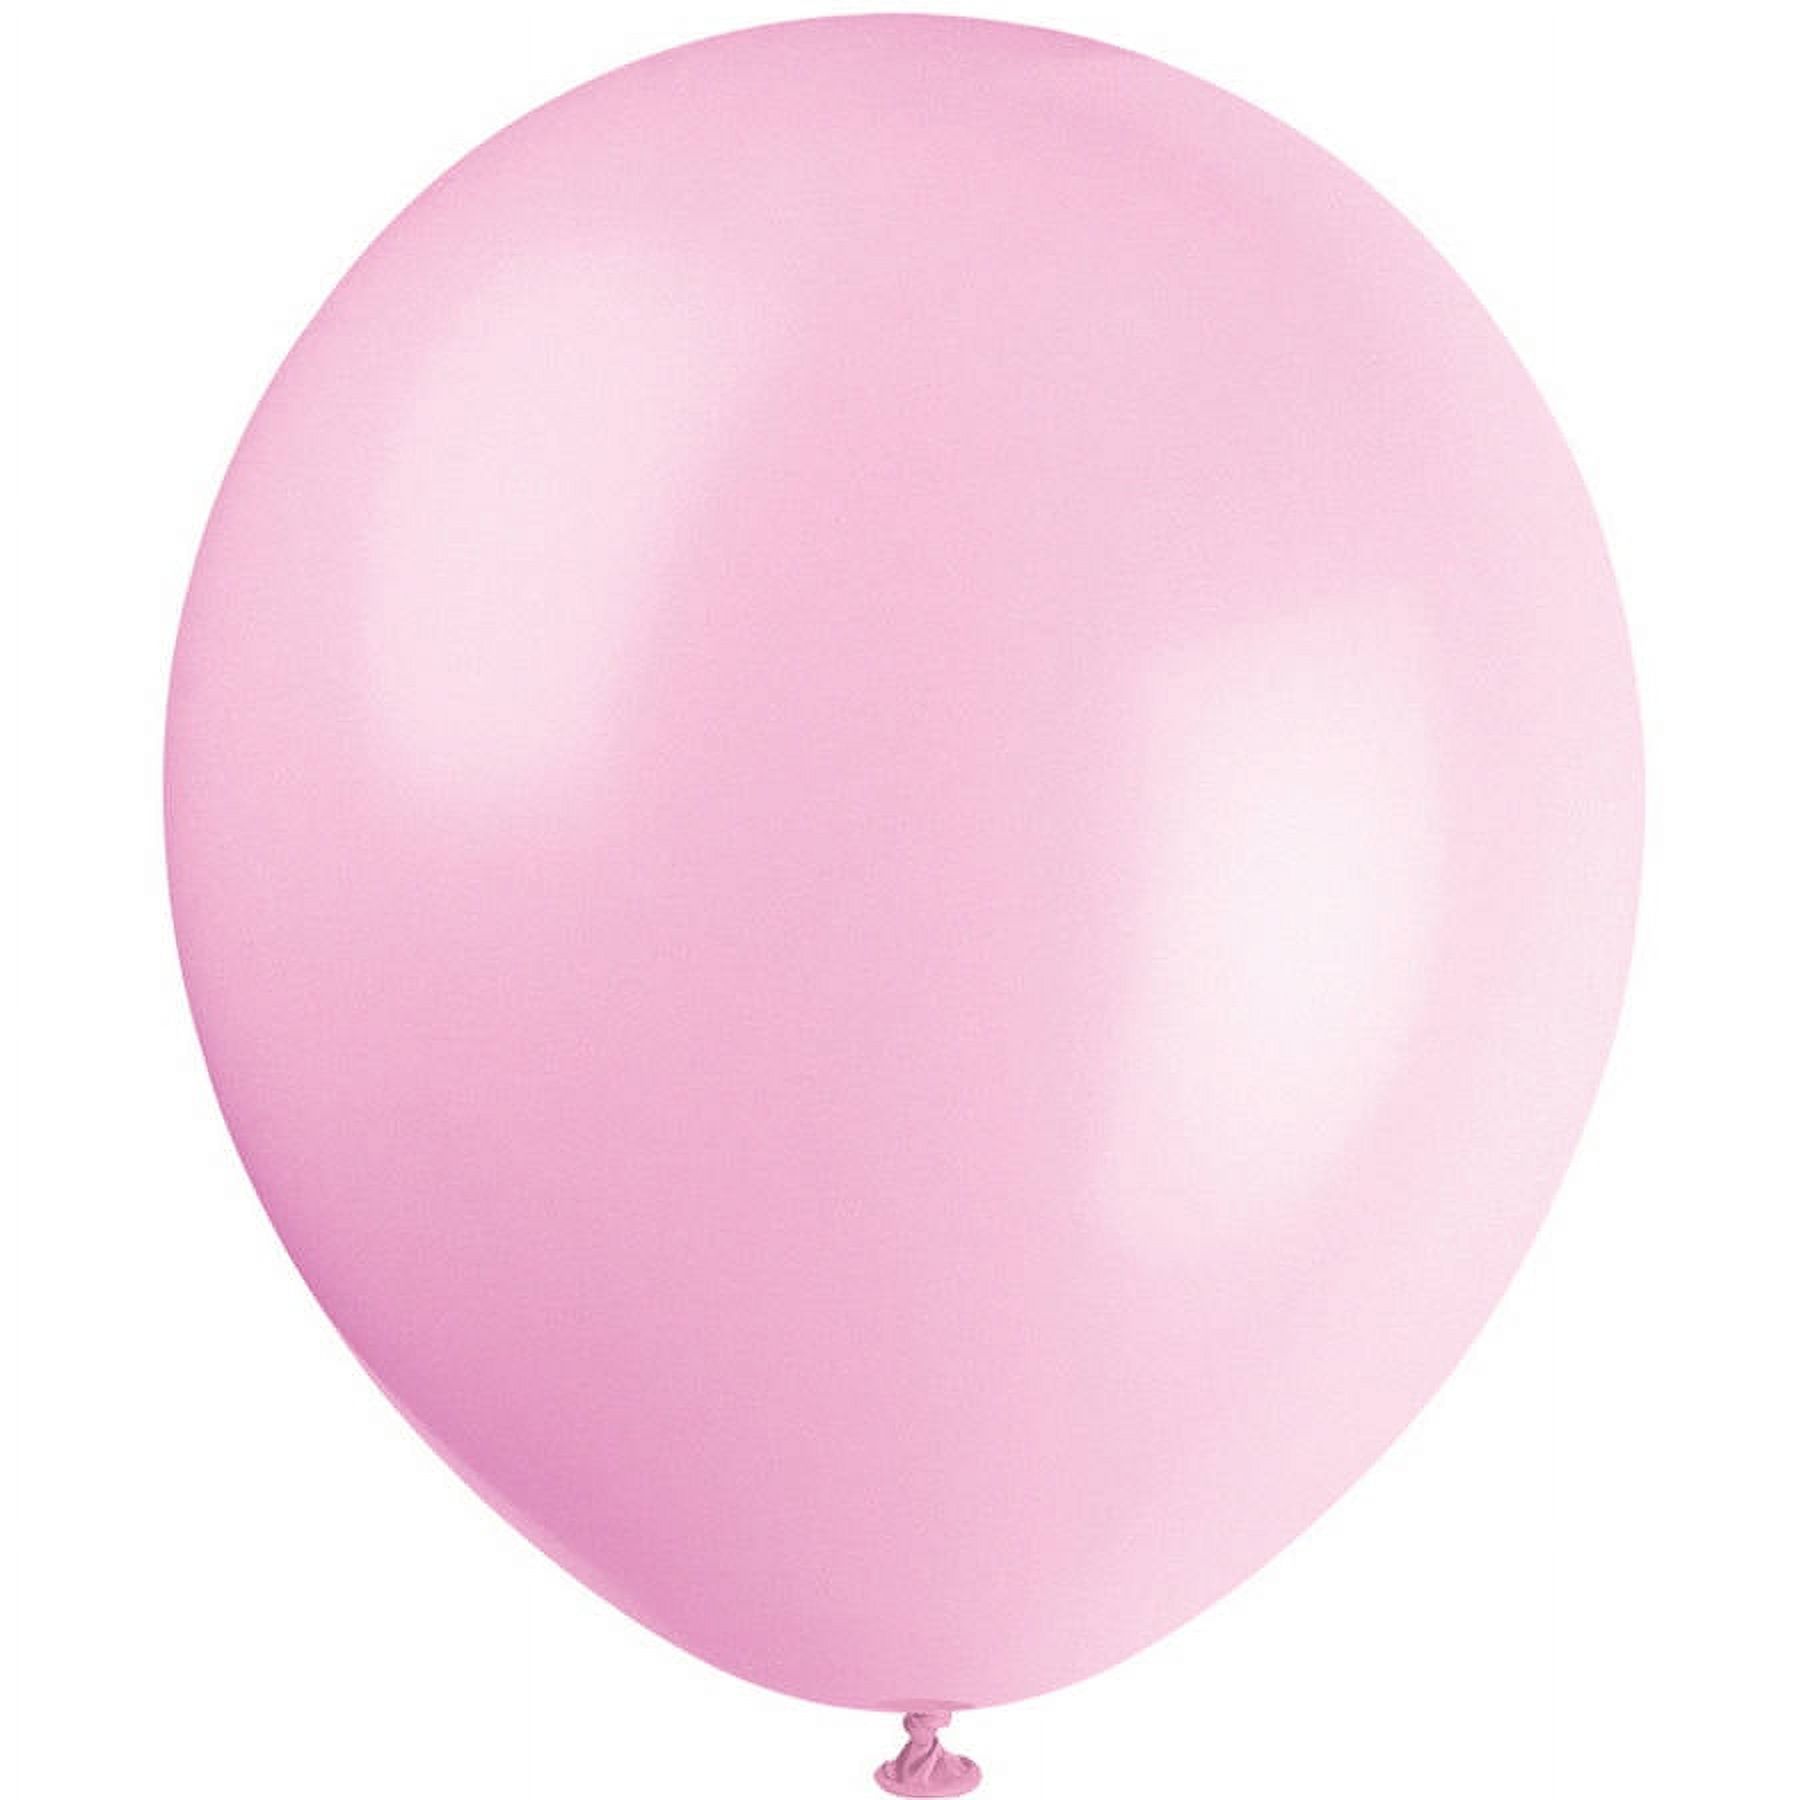 Unique Industries Latex 12" Pink Solid Print Birthday Balloons, 10 Count - image 1 of 2